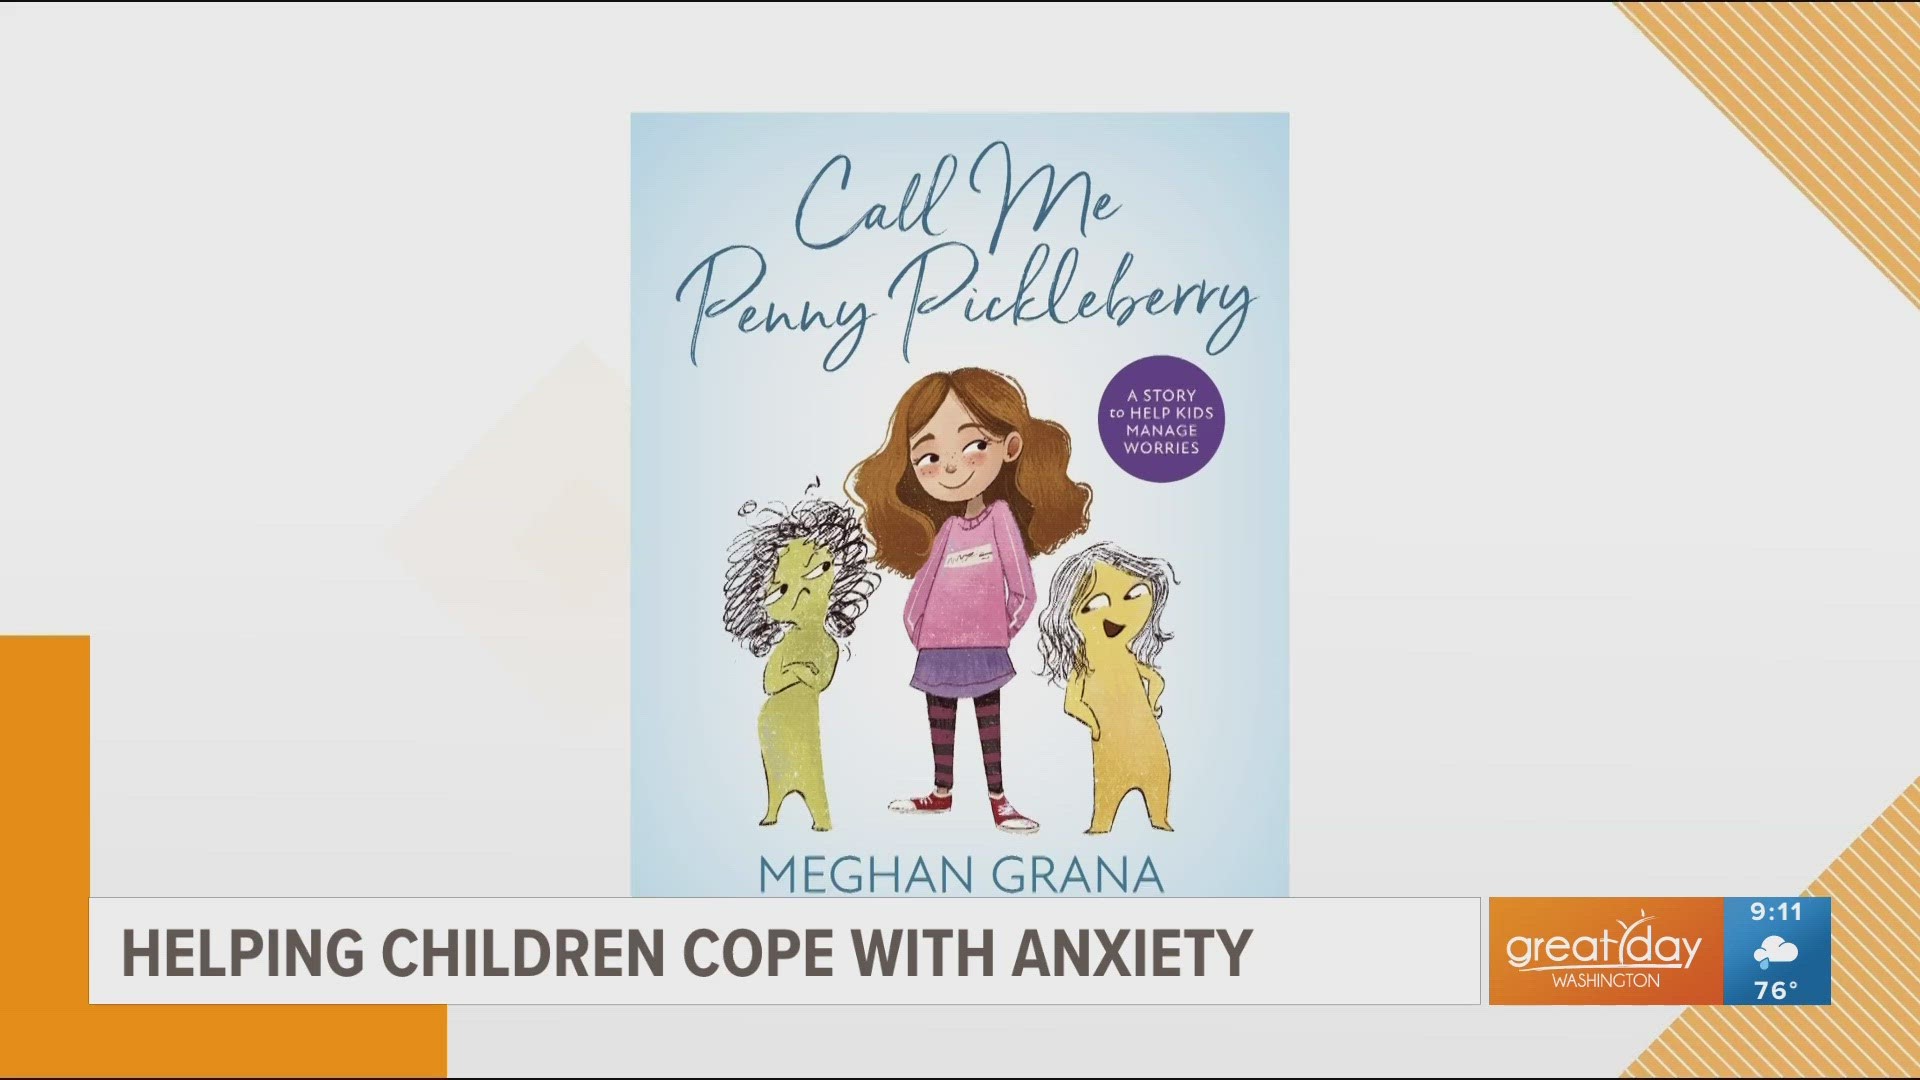 Meghan Grana wrote the children's book "Call Me Penny Pickleberry" to help normalize the discussion of mental health for young children.